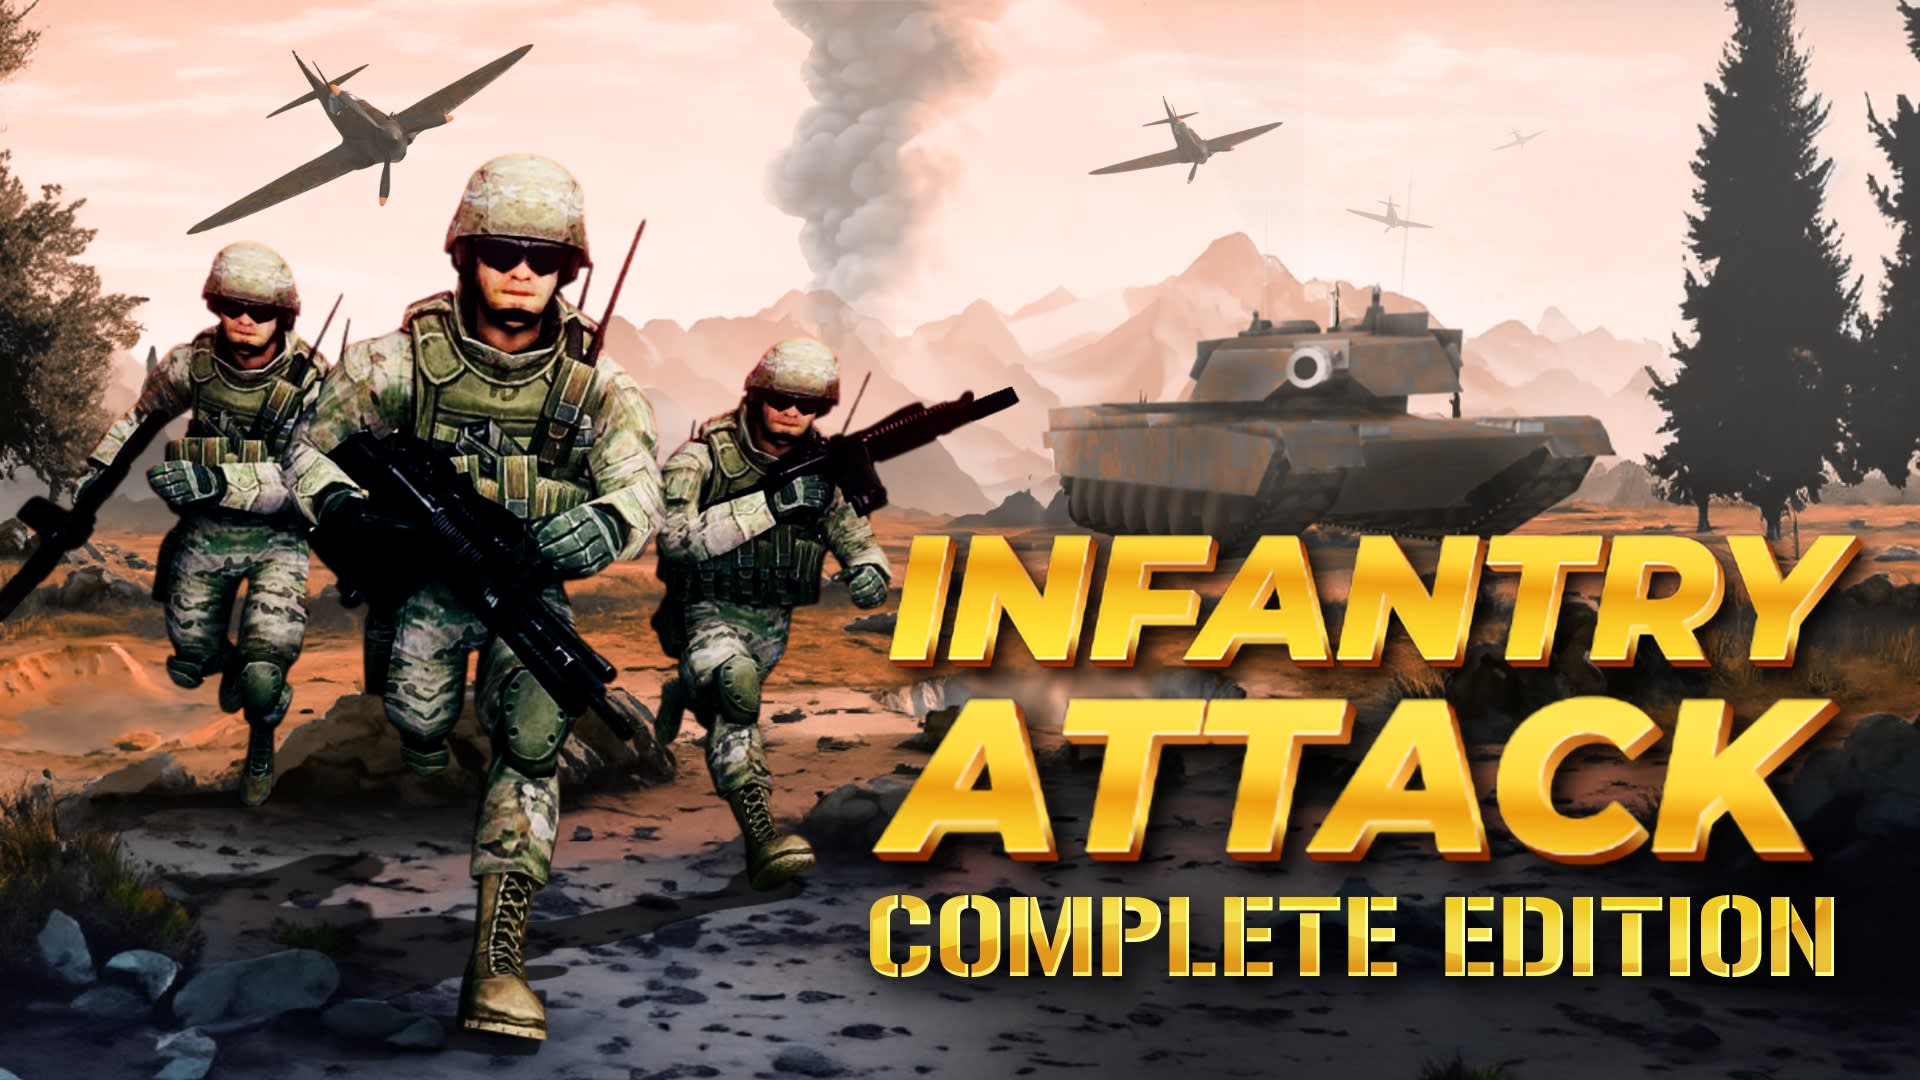 Infantry Attack: Complete Edition